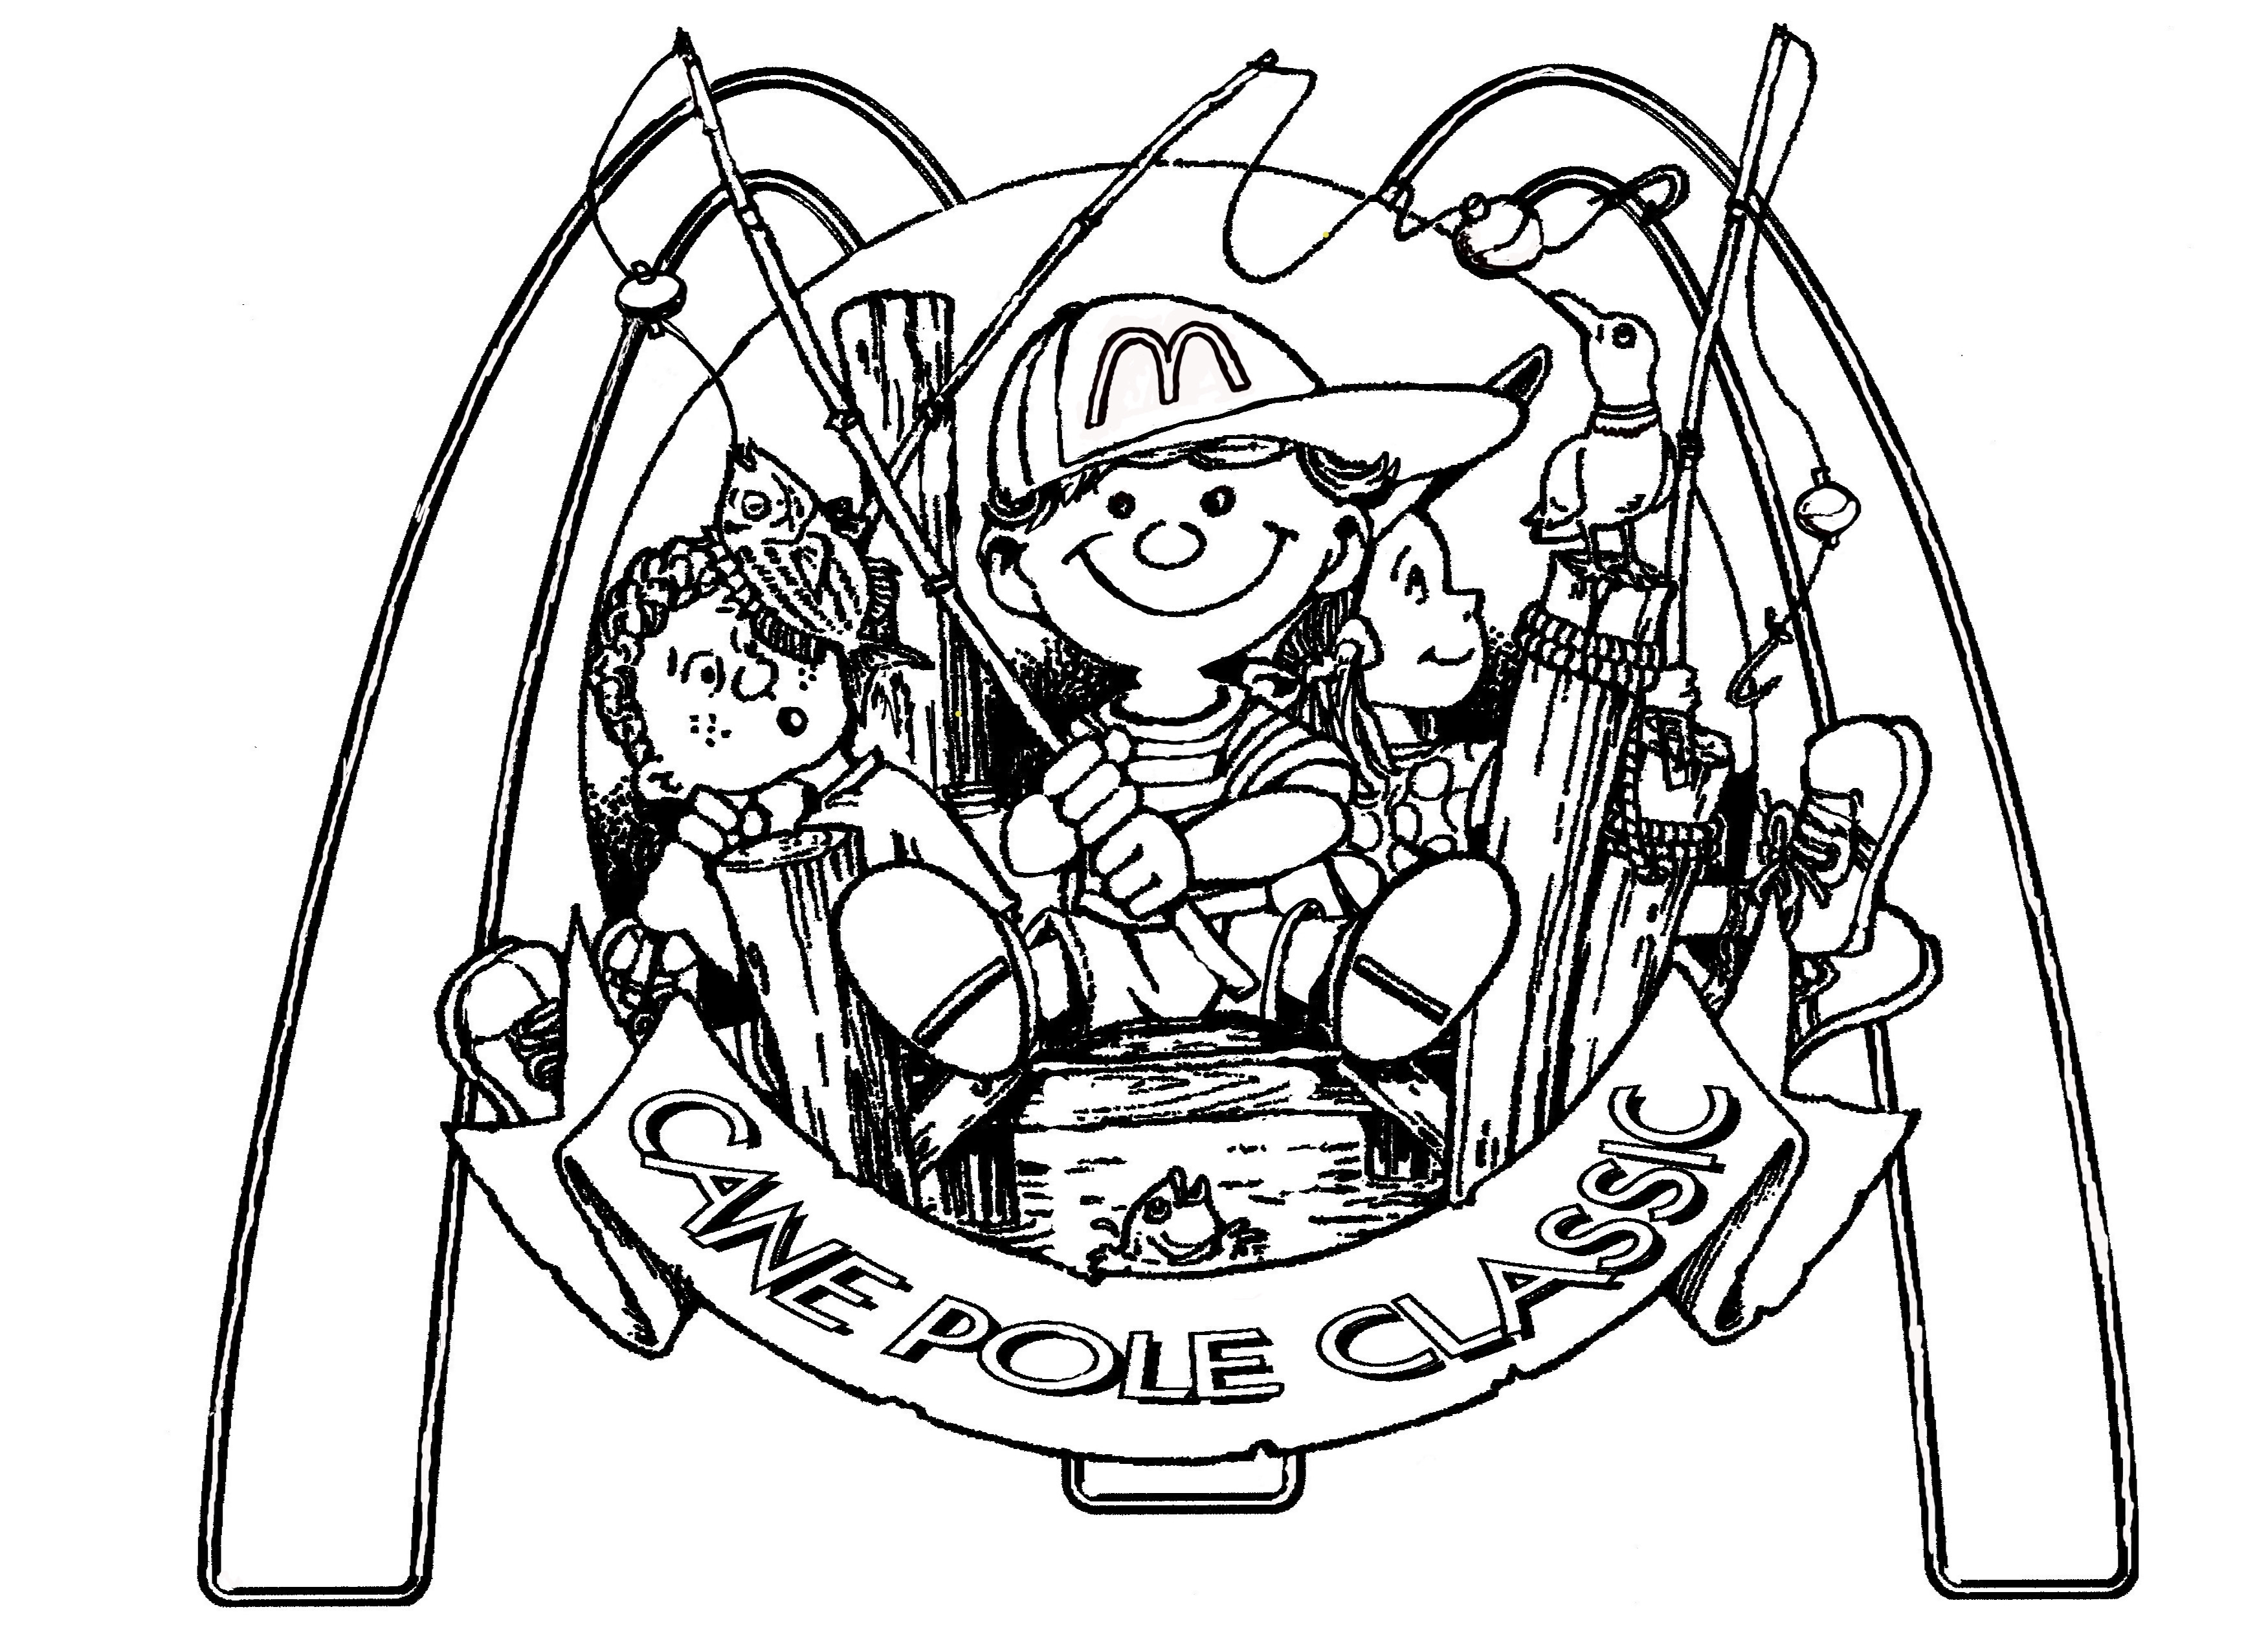 Ronald Mcdonald House Coloring Pages at GetDrawings Free download